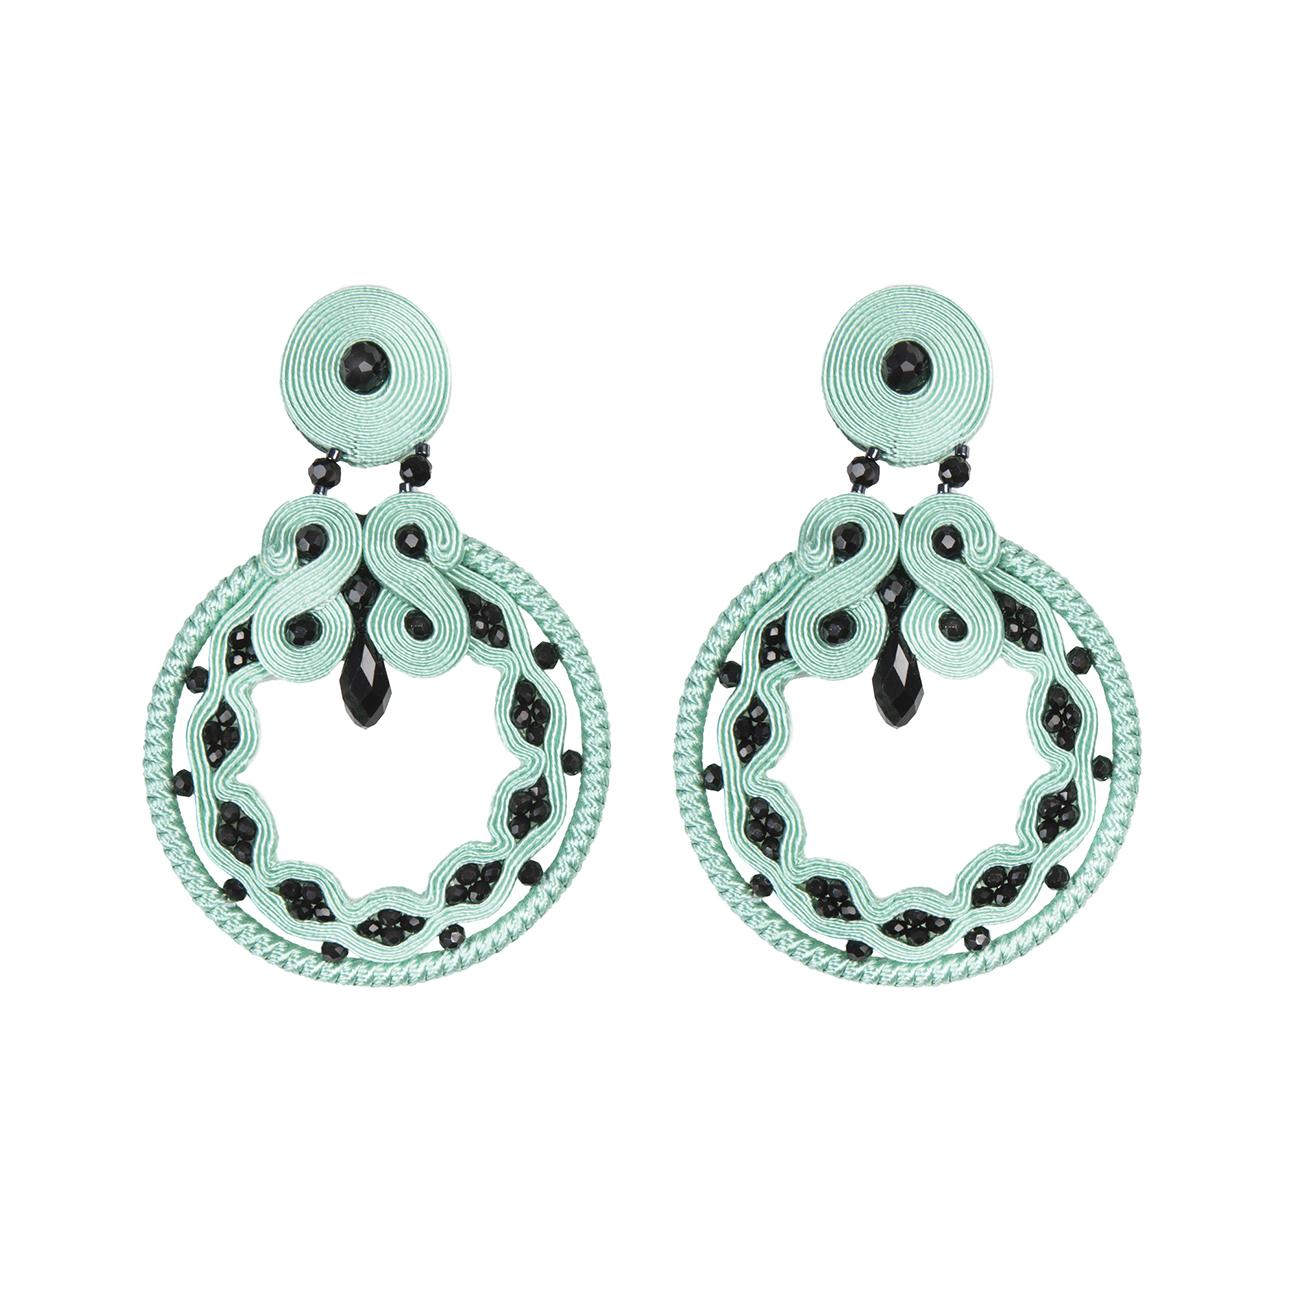 Musula Miabril Aqua & Jet Soutache Earrings  Silver Closure
Soutache earrings made with silk rayon and crystal beads & silver closure
In nine beautiful colours each for different moment and dresses for the Feria 
 MiAbril @miabril is a very special